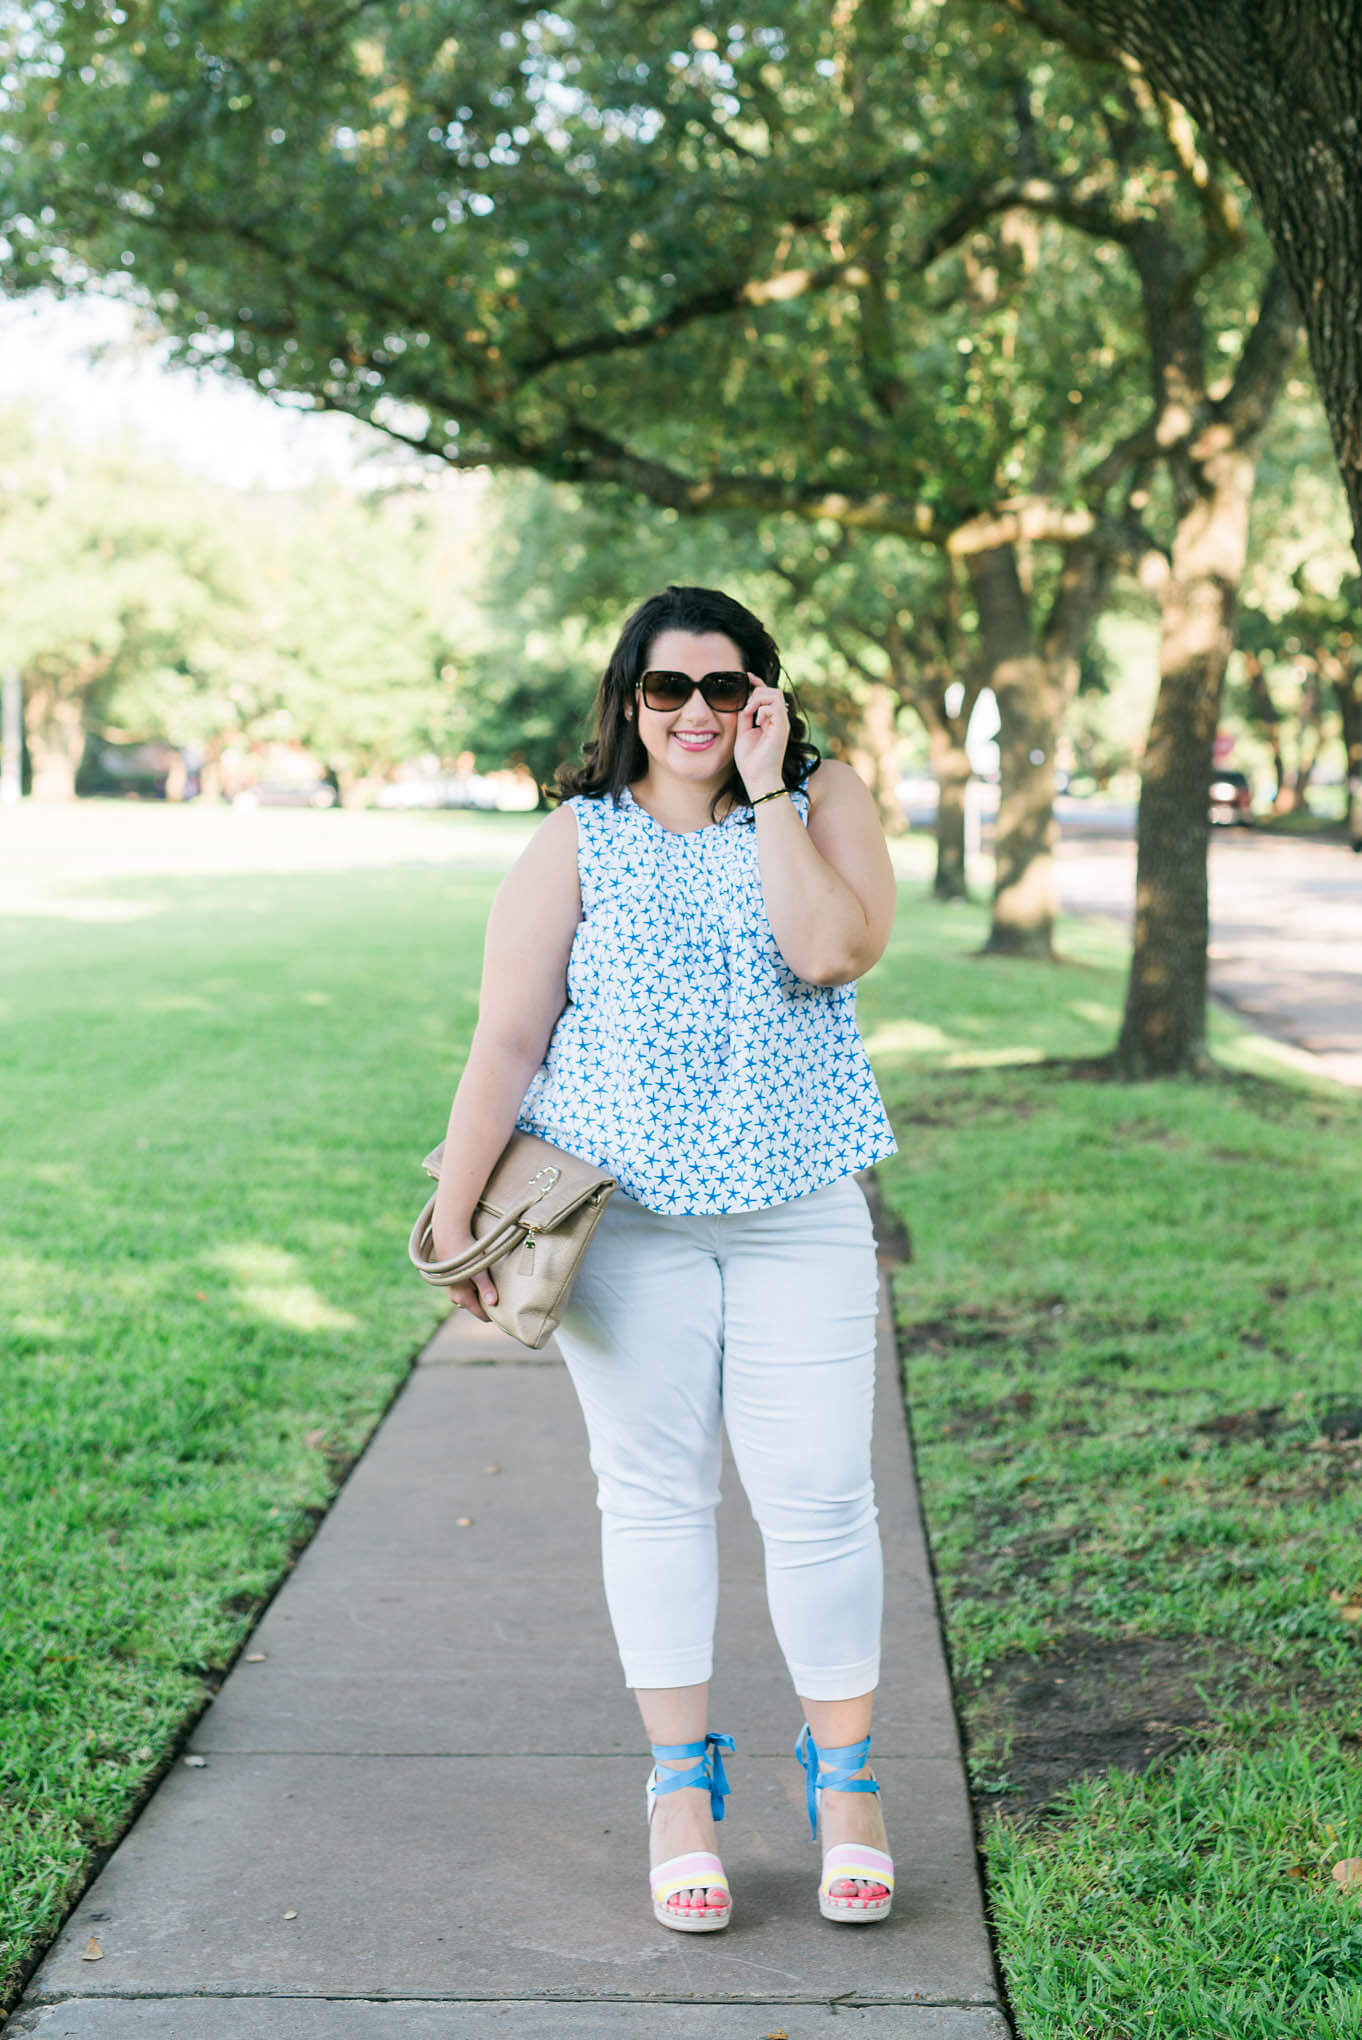 Kate Spade Summer Fun | Something Gold, Something Blue curvy style blog by Emily Bastedo | Plus Size Fashion, Summer fashion, What to wear in the summer, Kate Spade wedges, Melissa McCarthy Seven white capris, Elaine Turner purse, Chanel sunglasses, Kate Spade Broome Street collection